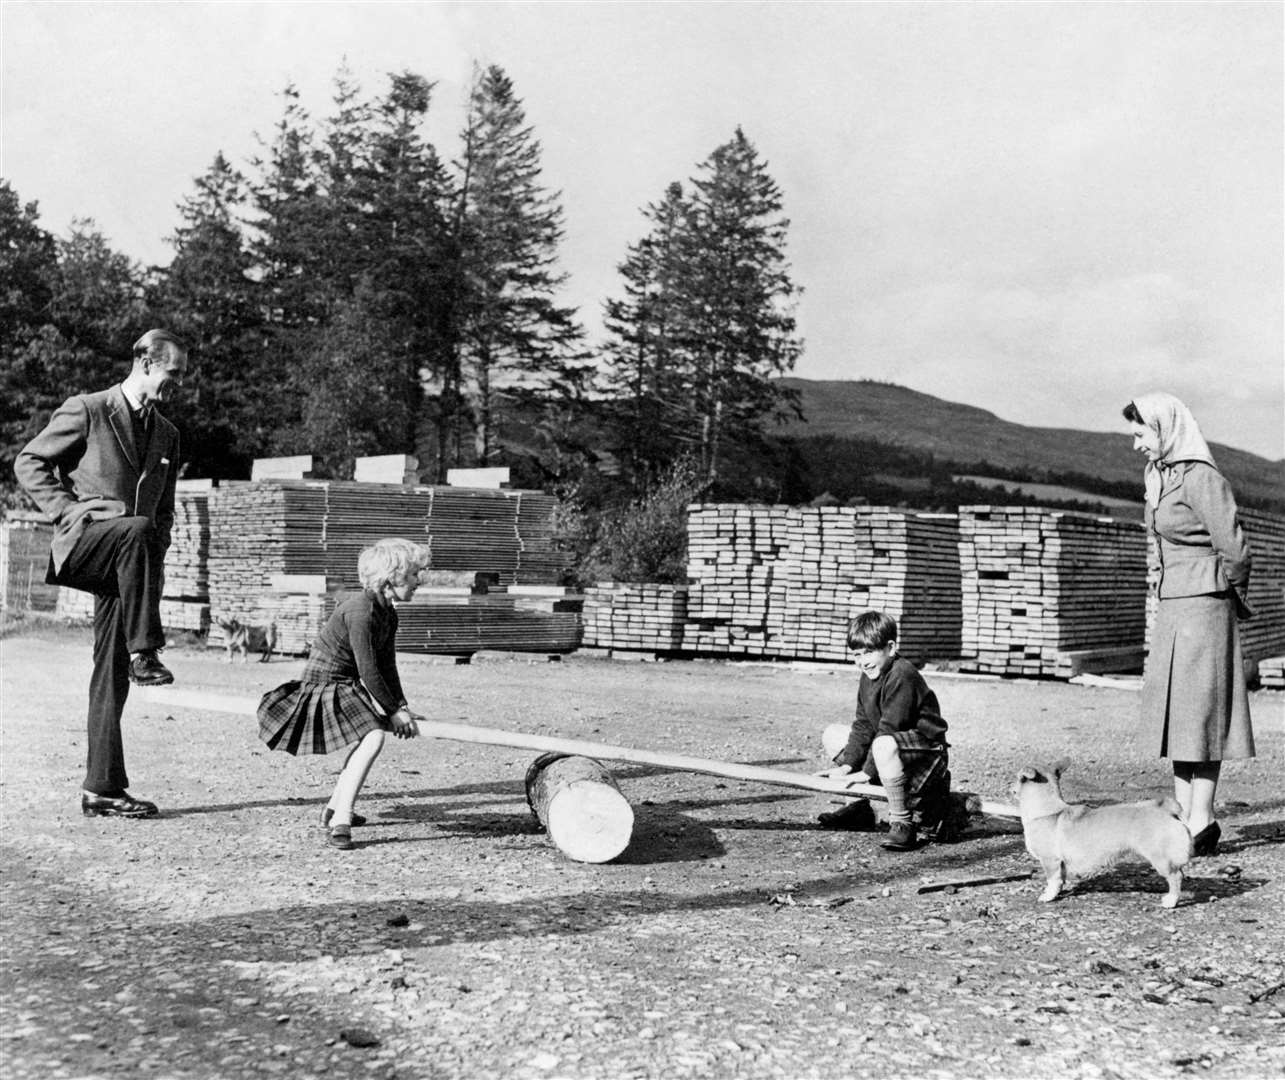 Prince Charles and Princess Anne, watched by the Queen and the Duke of Edinburgh, play on a see-saw made from a log and a plank of wood on the Balmoral Estate in 1957 (PA)